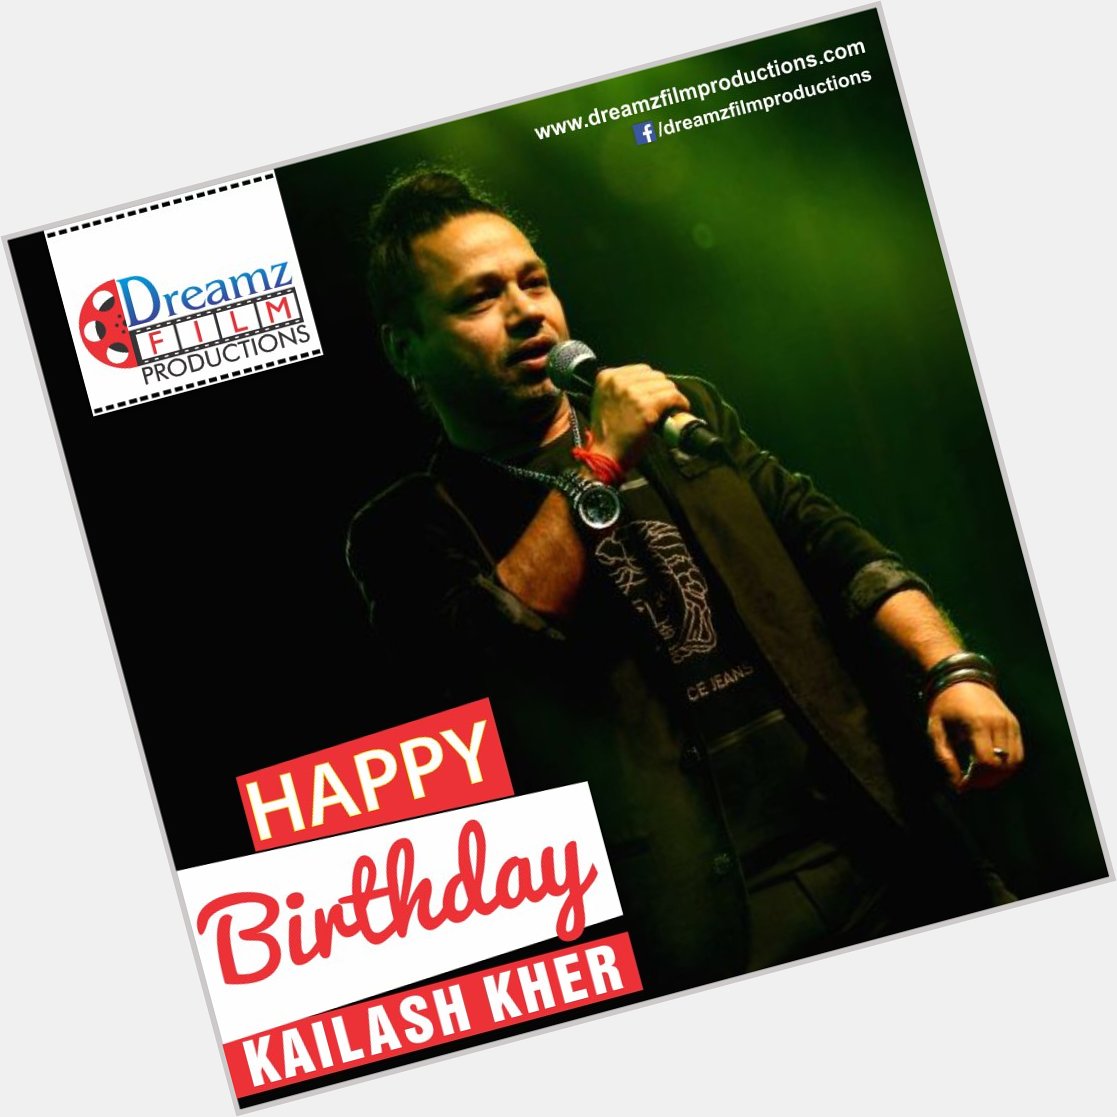  wishes a very  to Kailash Kher (renowned singer) 